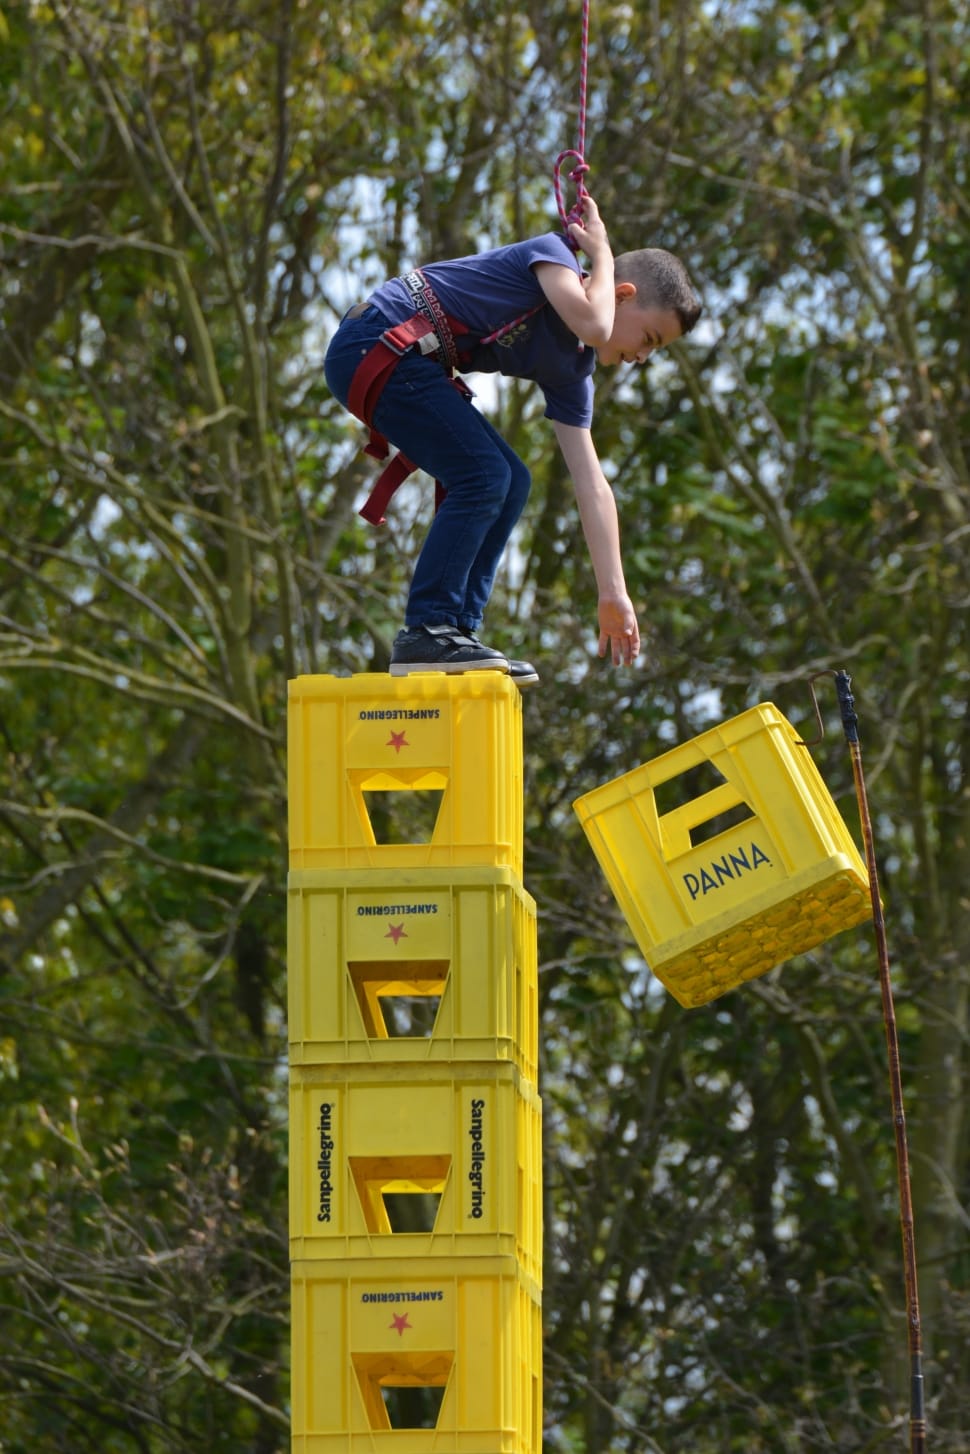 boy wearing blue shirt on top of yellow plastic crates preview